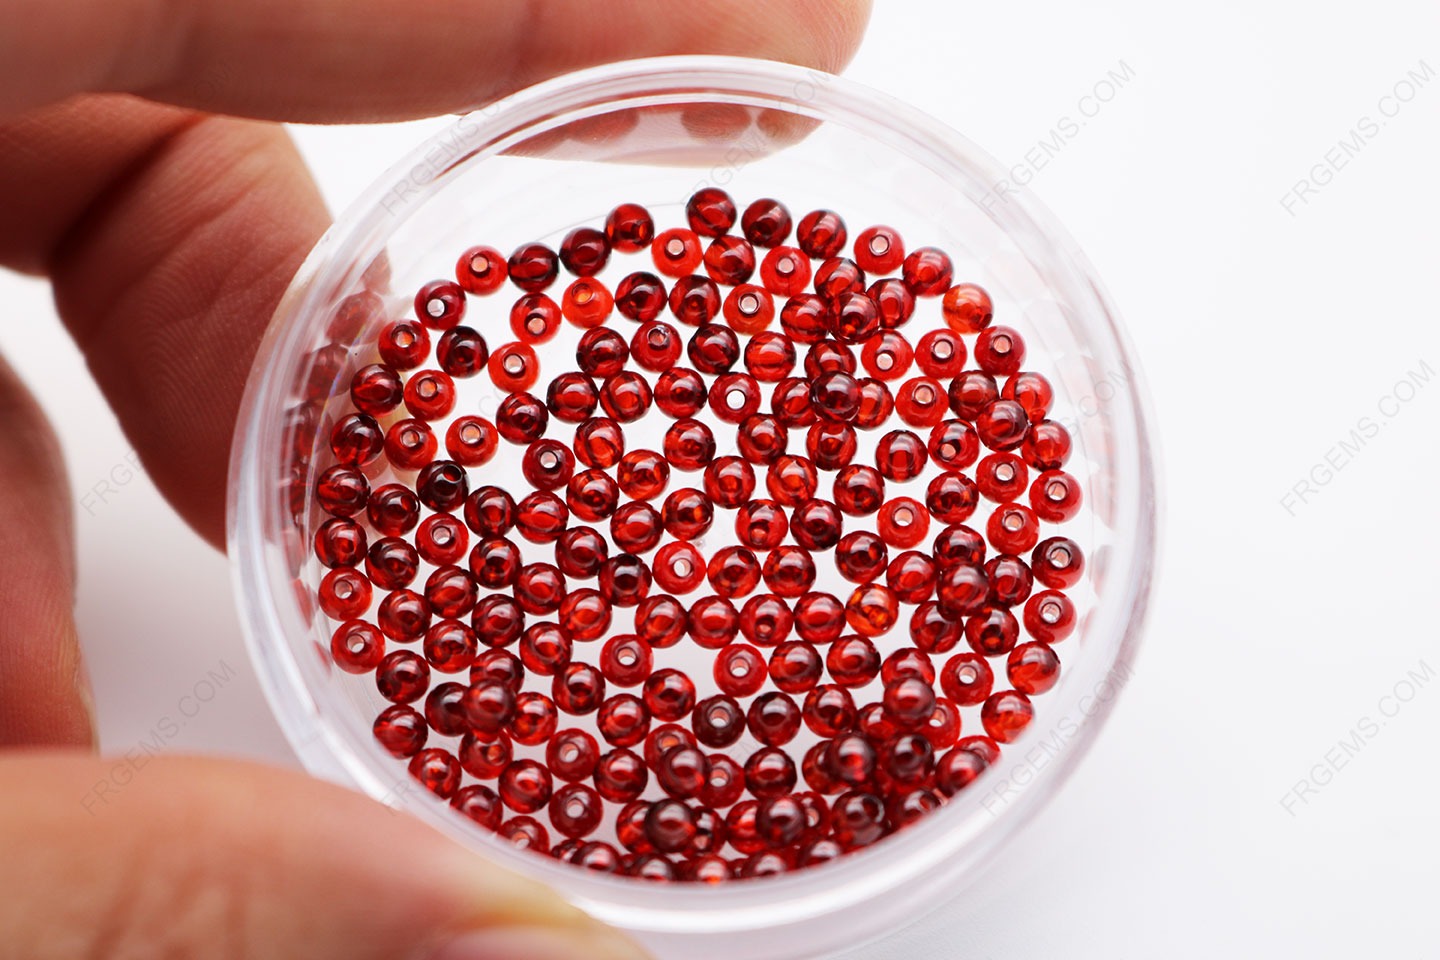 Cubic Zirconia Garnet Red Round Smooth Ball drilled Holes 3mm stones CZ22 IMG_0800